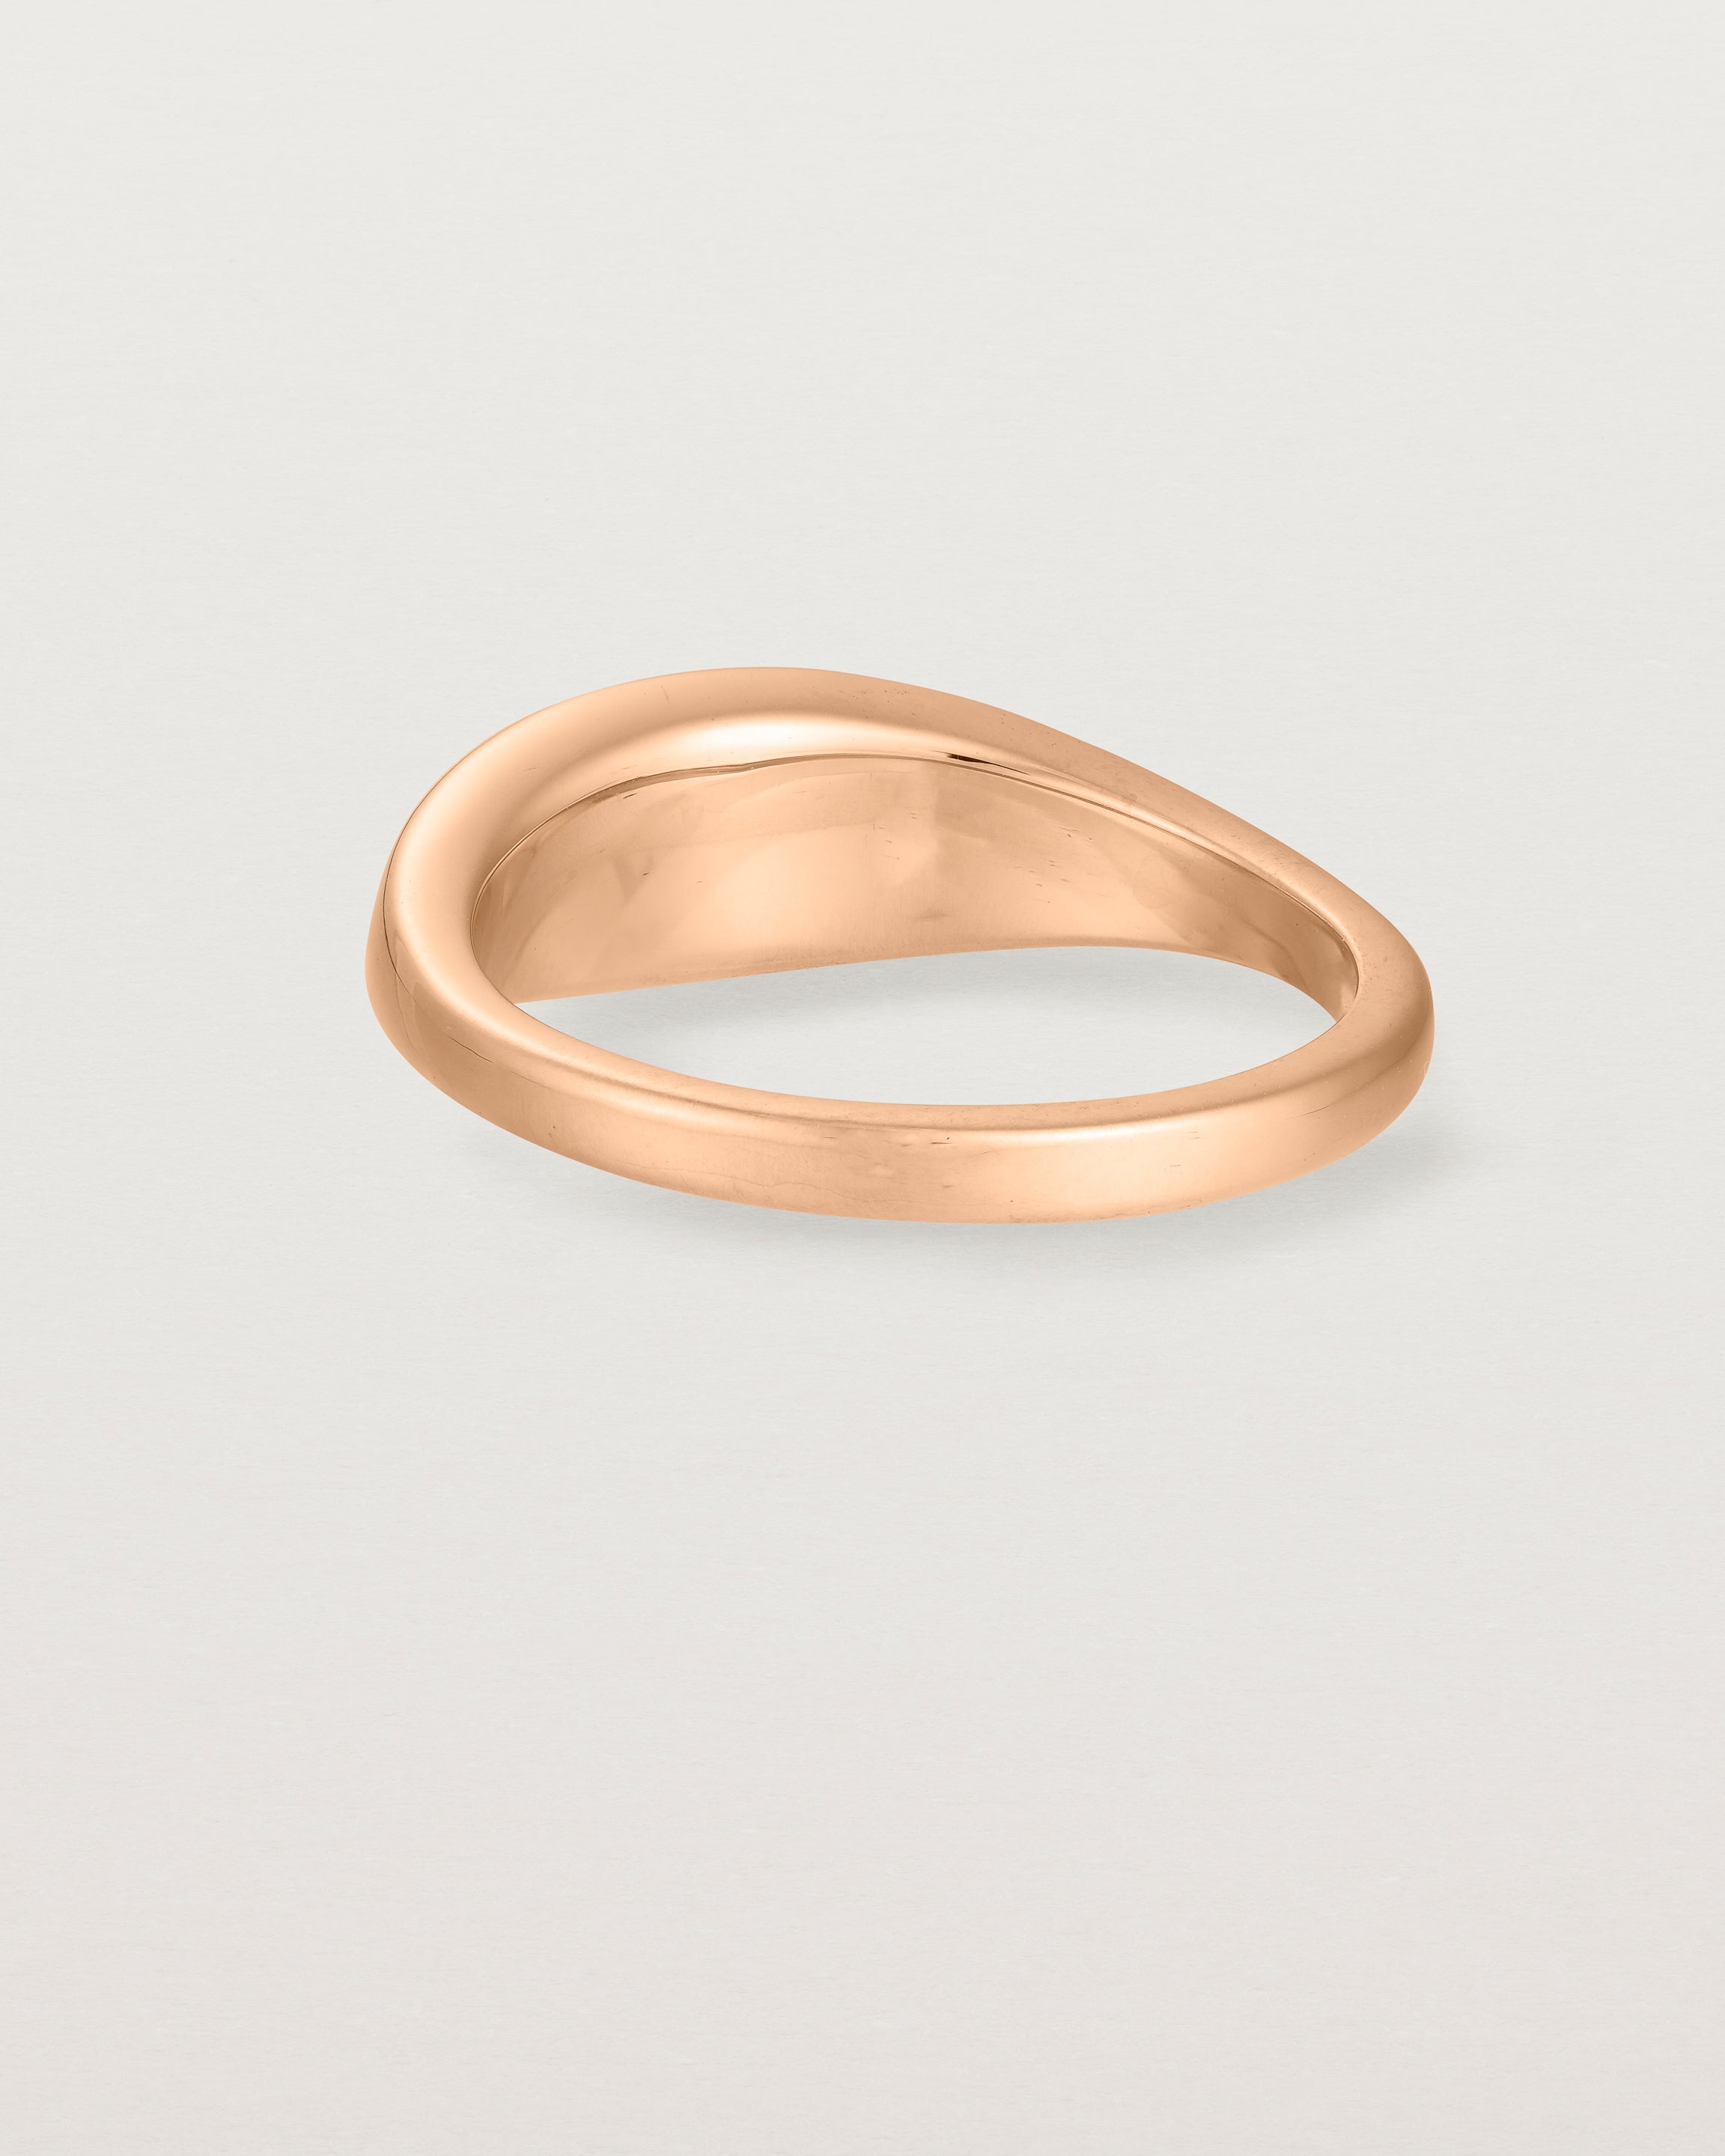 Back view of the Seule Ring | Rose Gold.